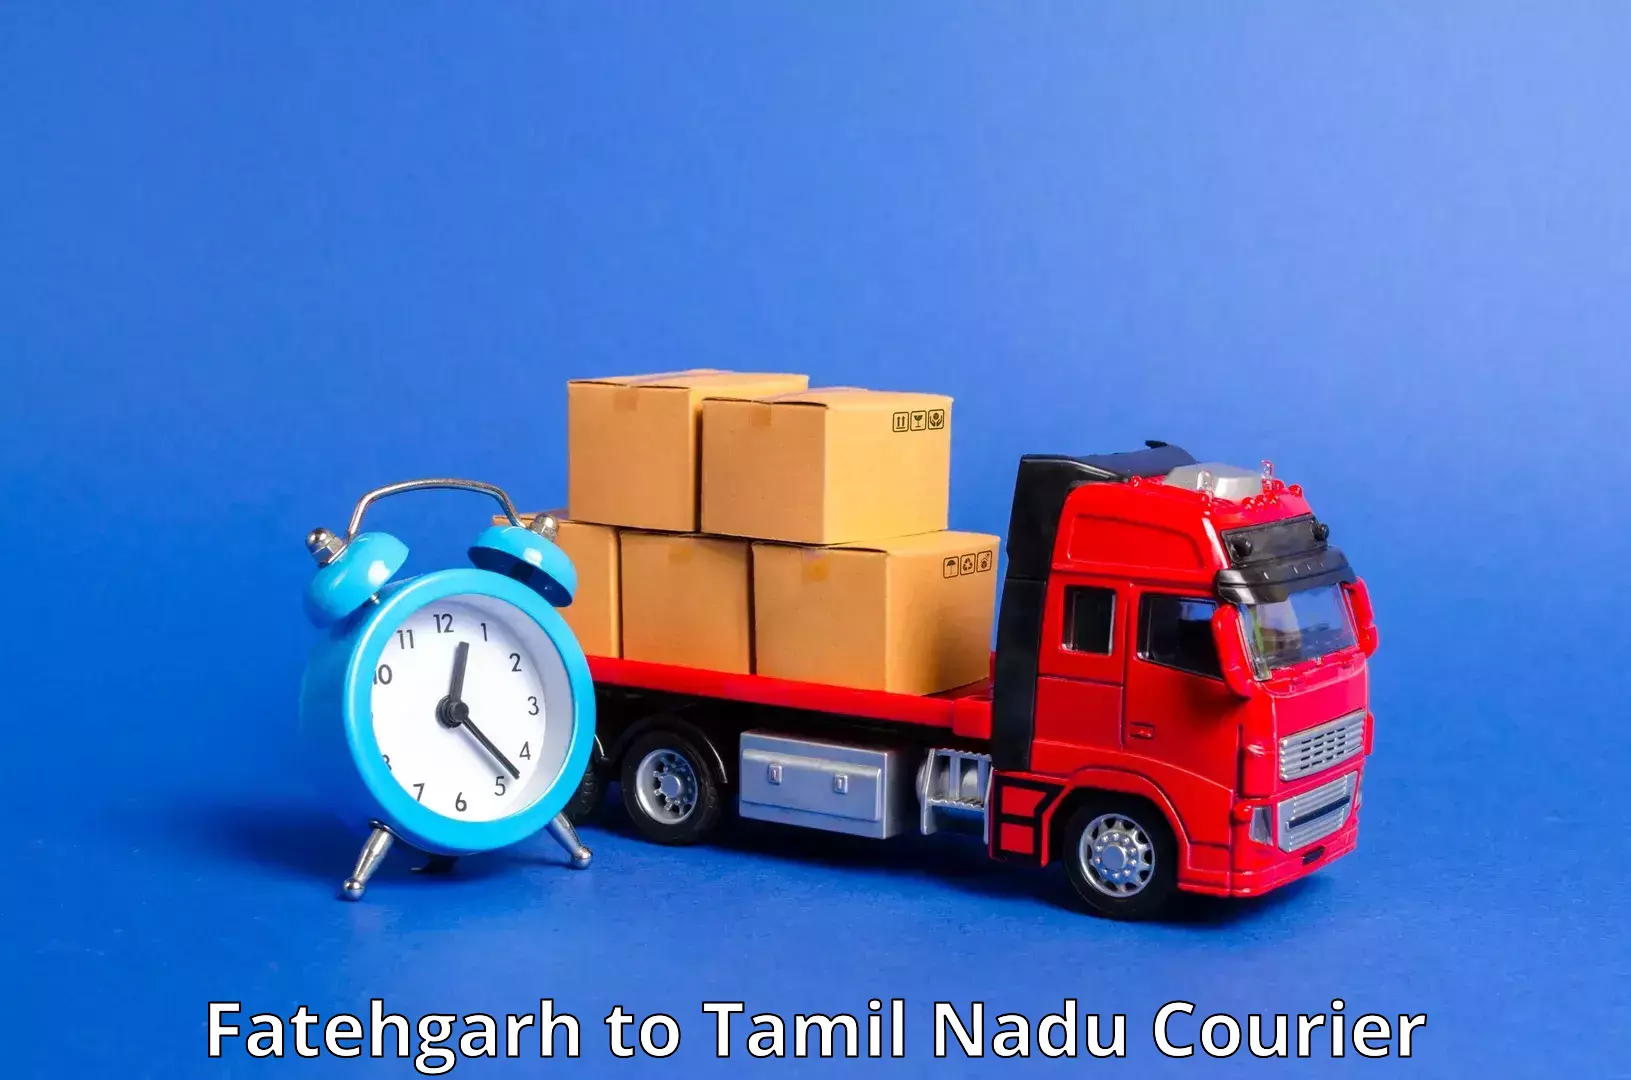 Full-service courier options Fatehgarh to Coimbatore